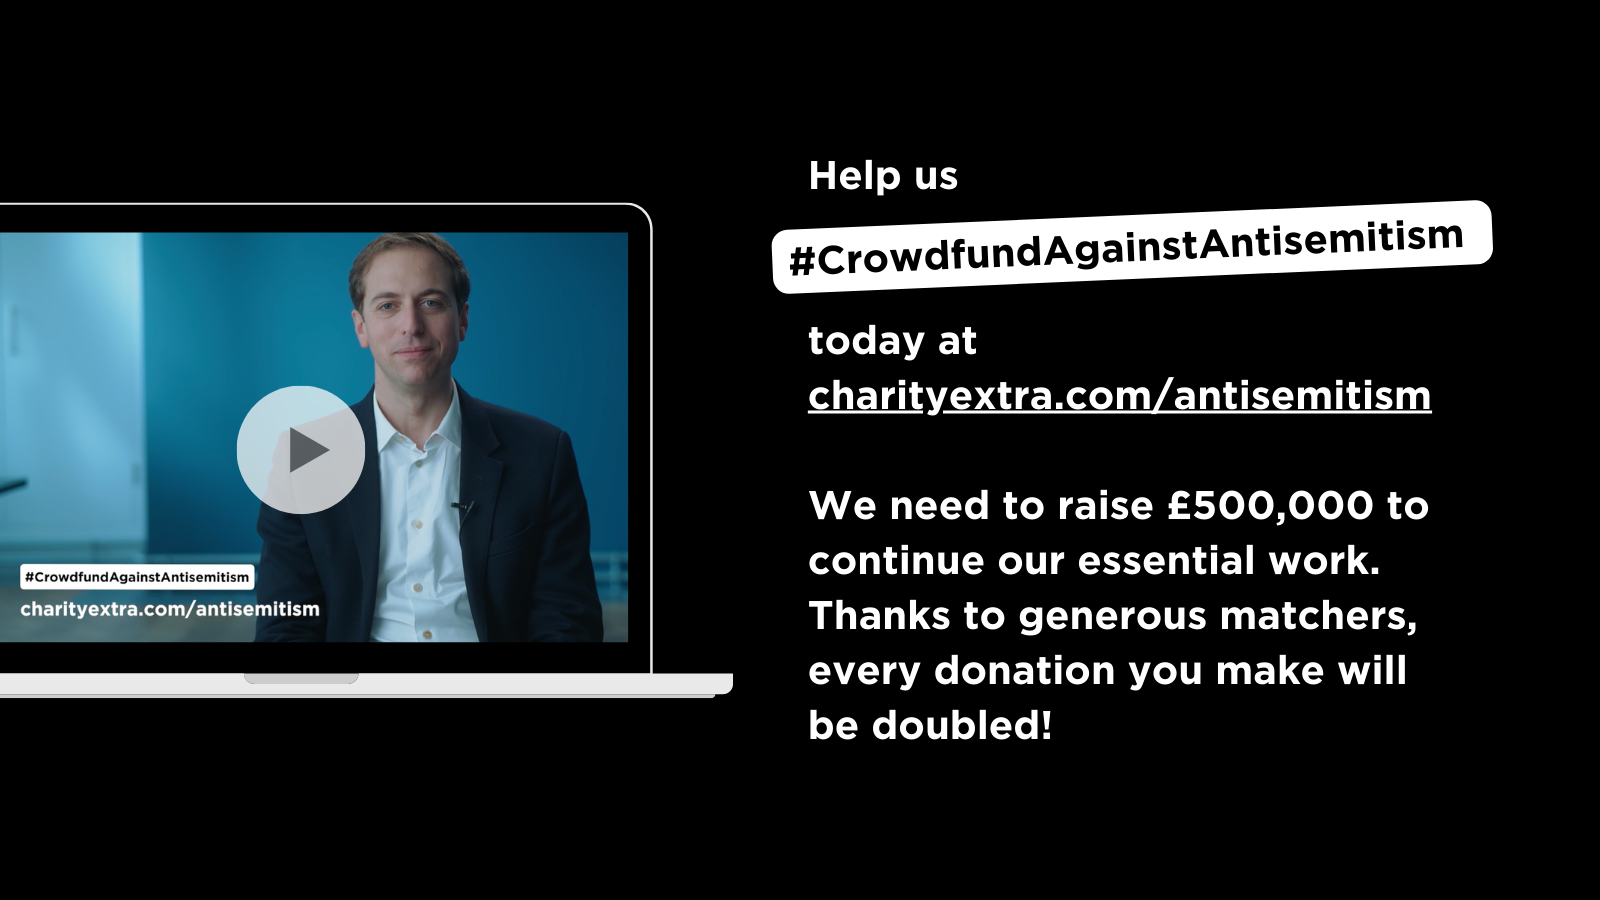 Help us #CrowdfundAgainstAntisemitism today at charityextra.com/antisemitism
We need to raise €500,000 to continue our essential work.
Thanks to generous matchers, every donation you make will be doubled!